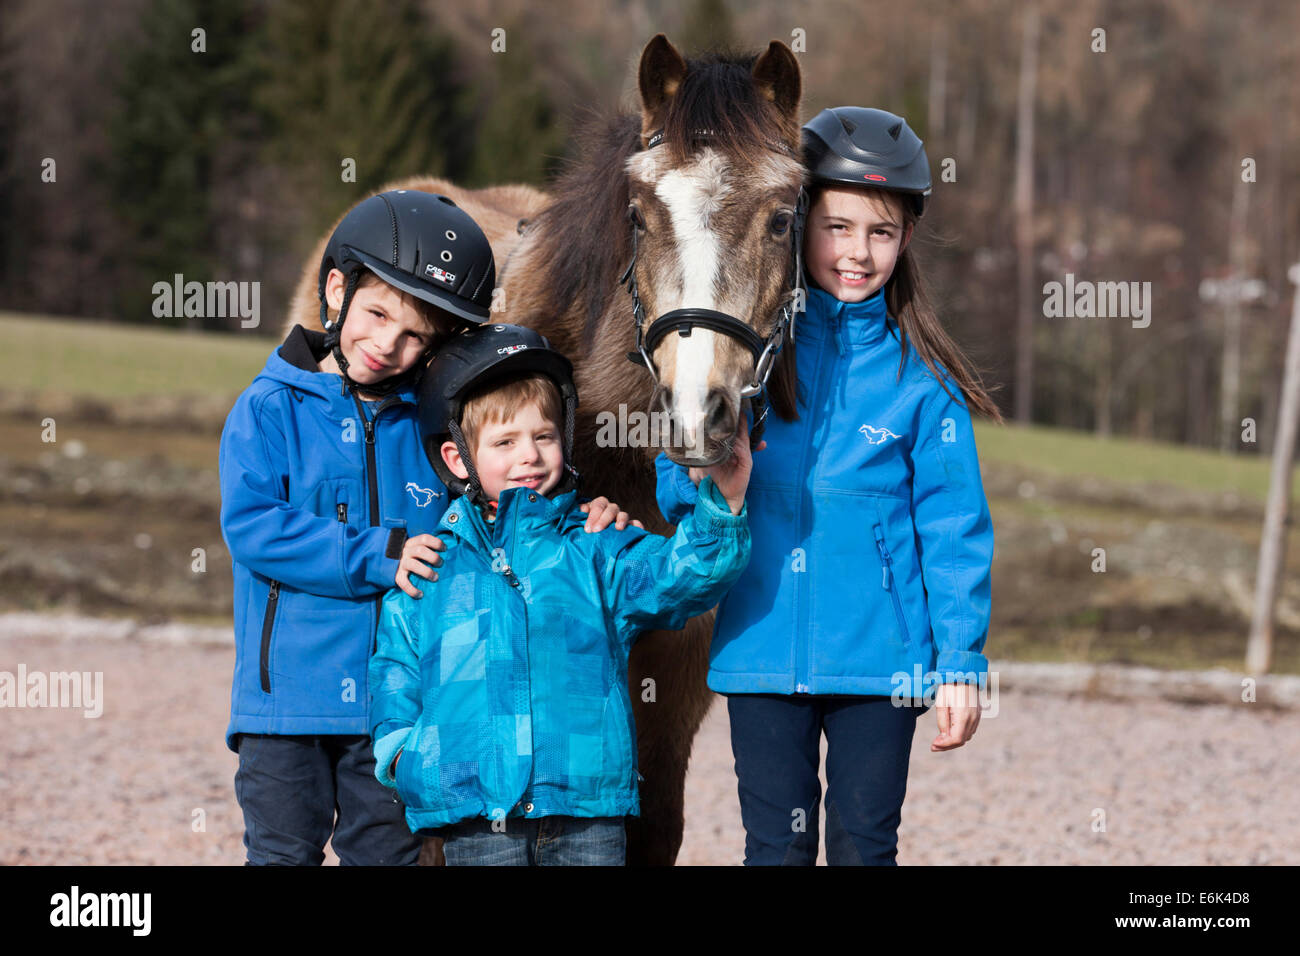 Three children wearing riding helmets standing beside a pony, dun, with a bridle, Tyrol, Austria Stock Photo